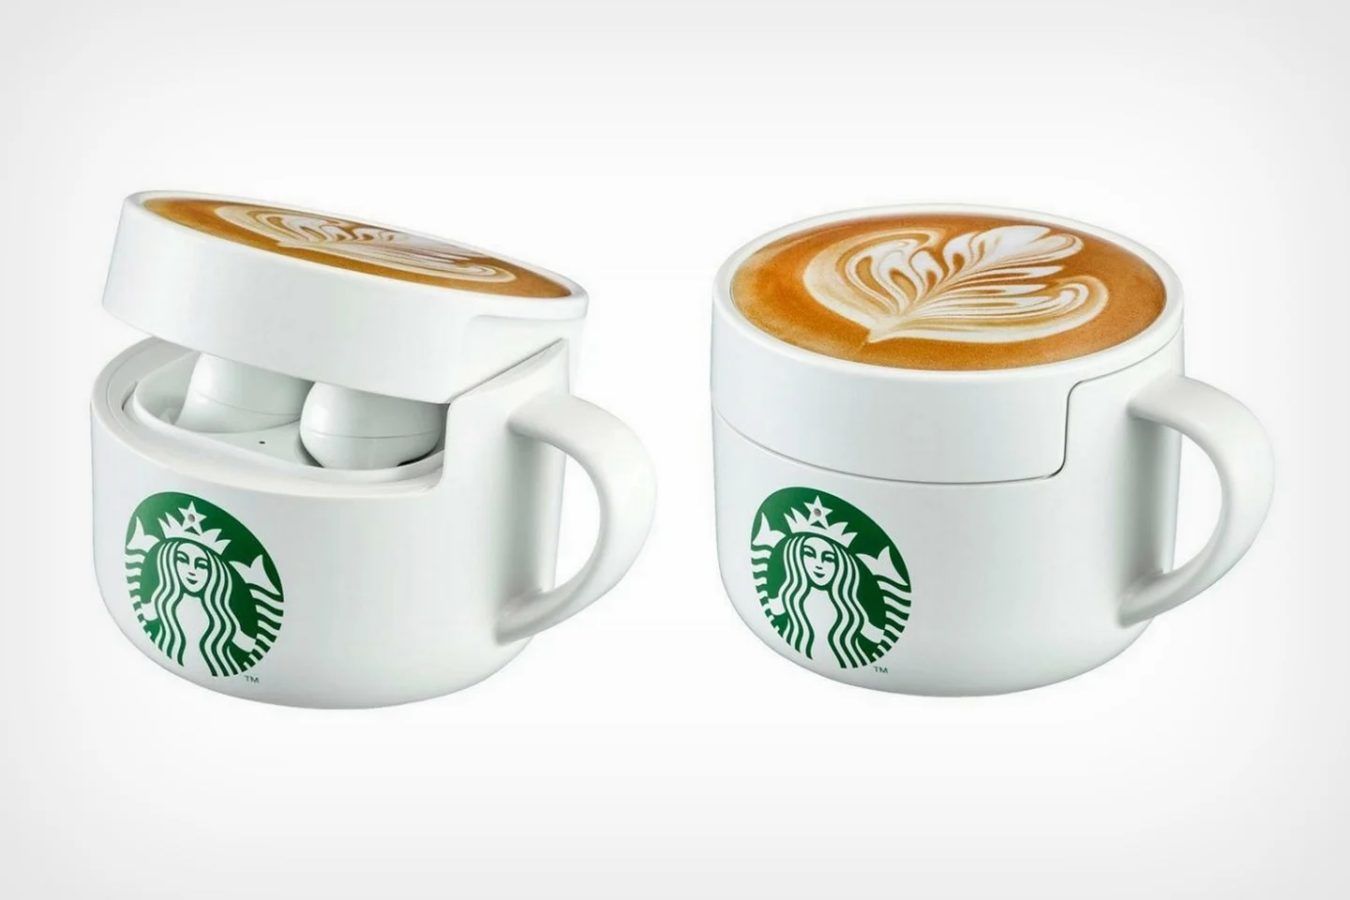 This Starbucks x Samsung collaboration was made for all coffee geeks